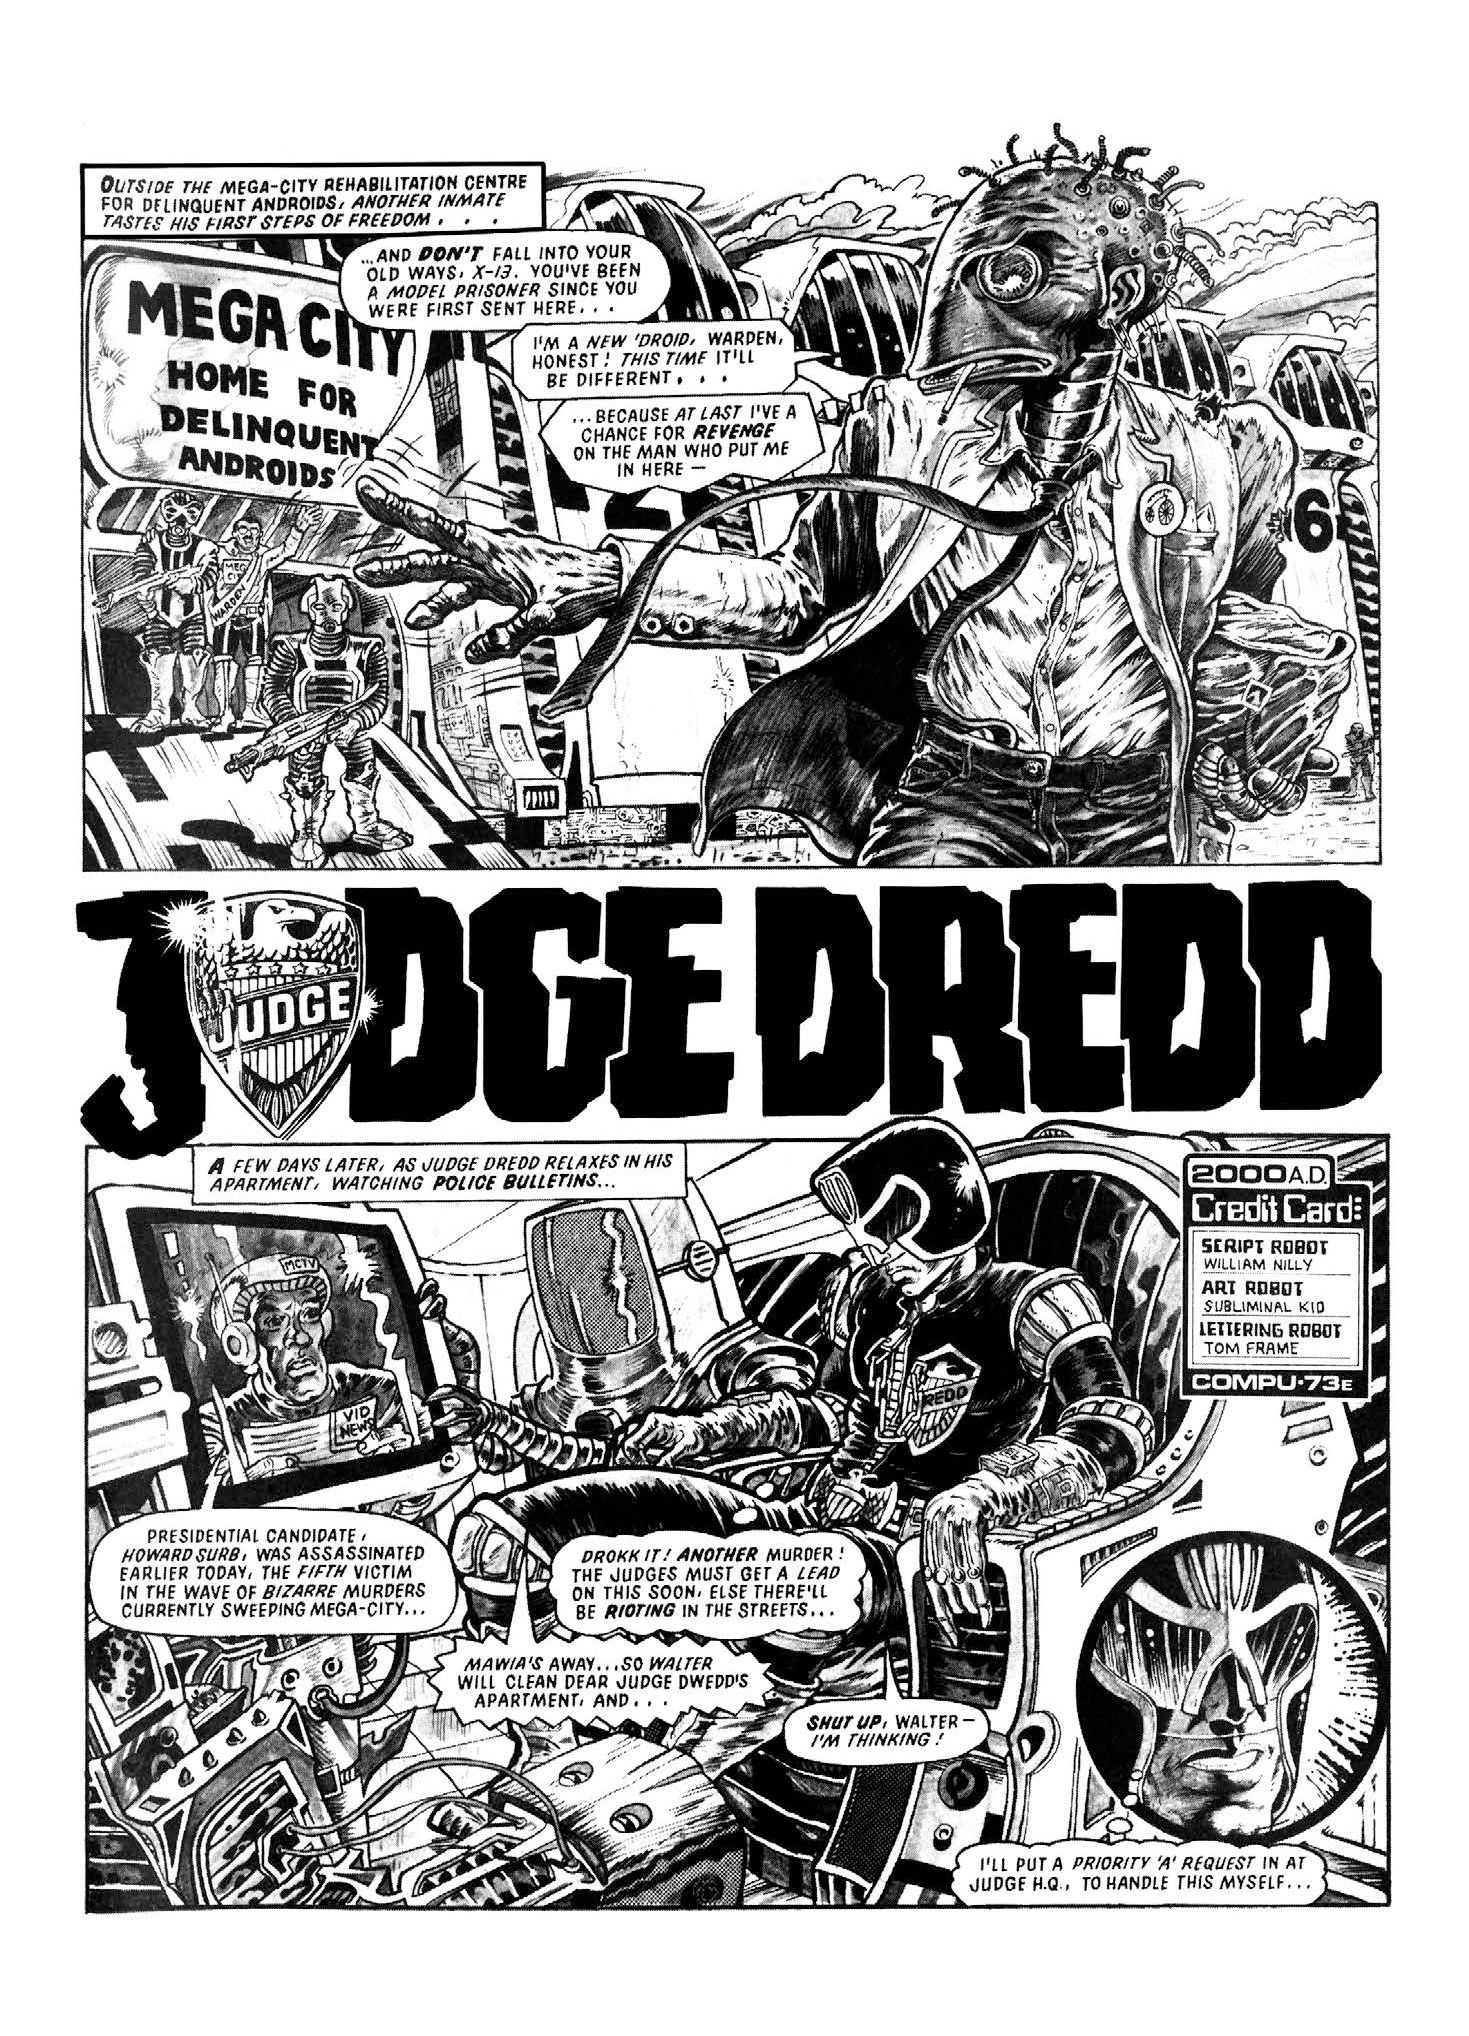 Read online Judge Dredd: The Restricted Files comic -  Issue # TPB 1 - 22